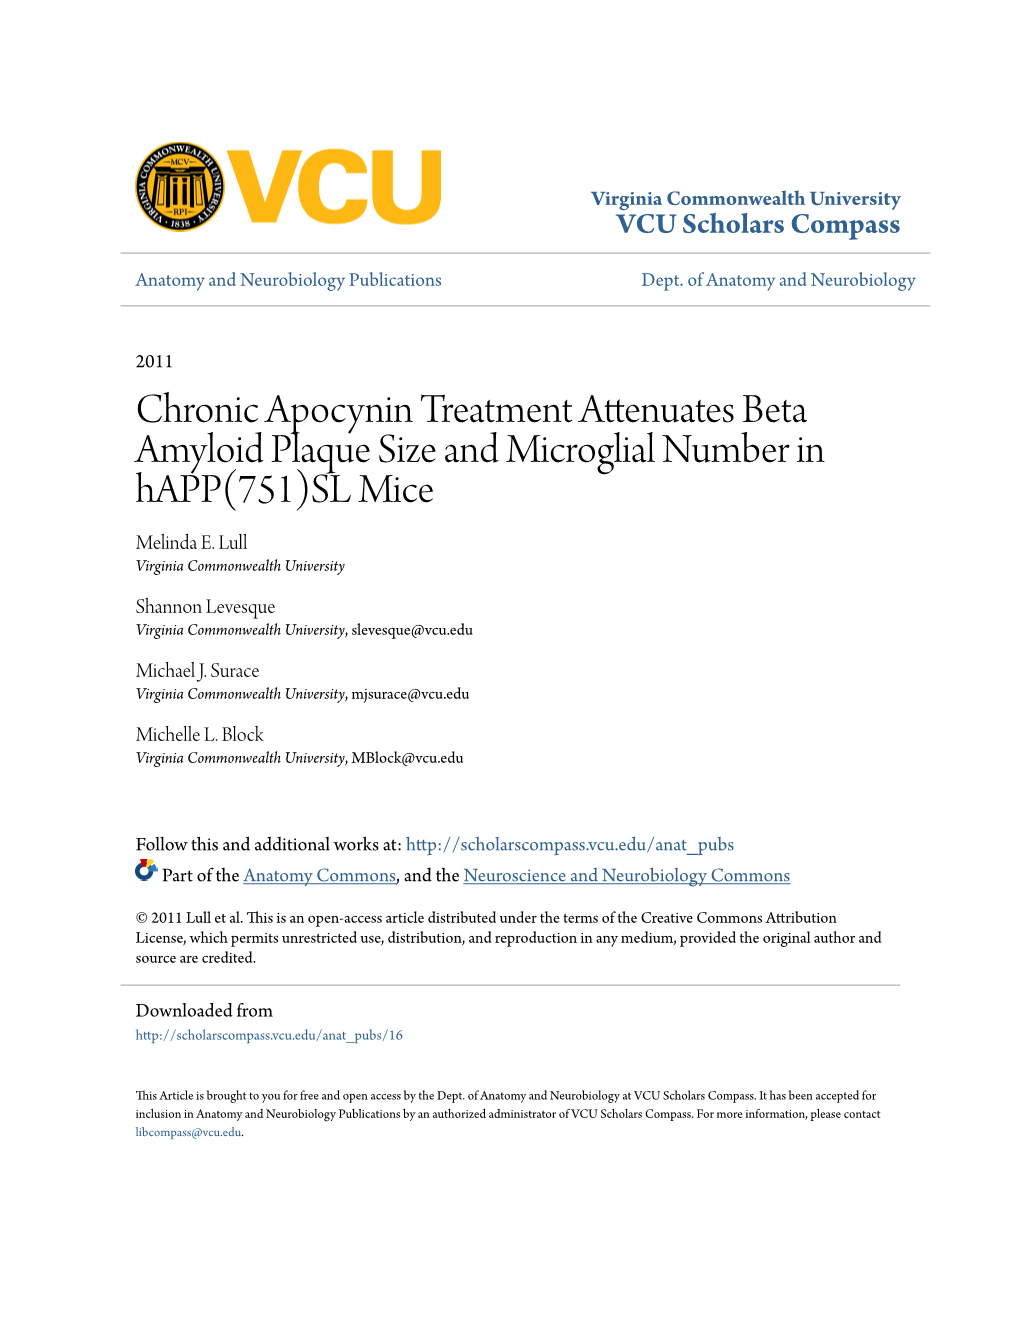 Chronic Apocynin Treatment Attenuates Beta Amyloid Plaque Size and Microglial Number in Happ(751)SL Mice Melinda E